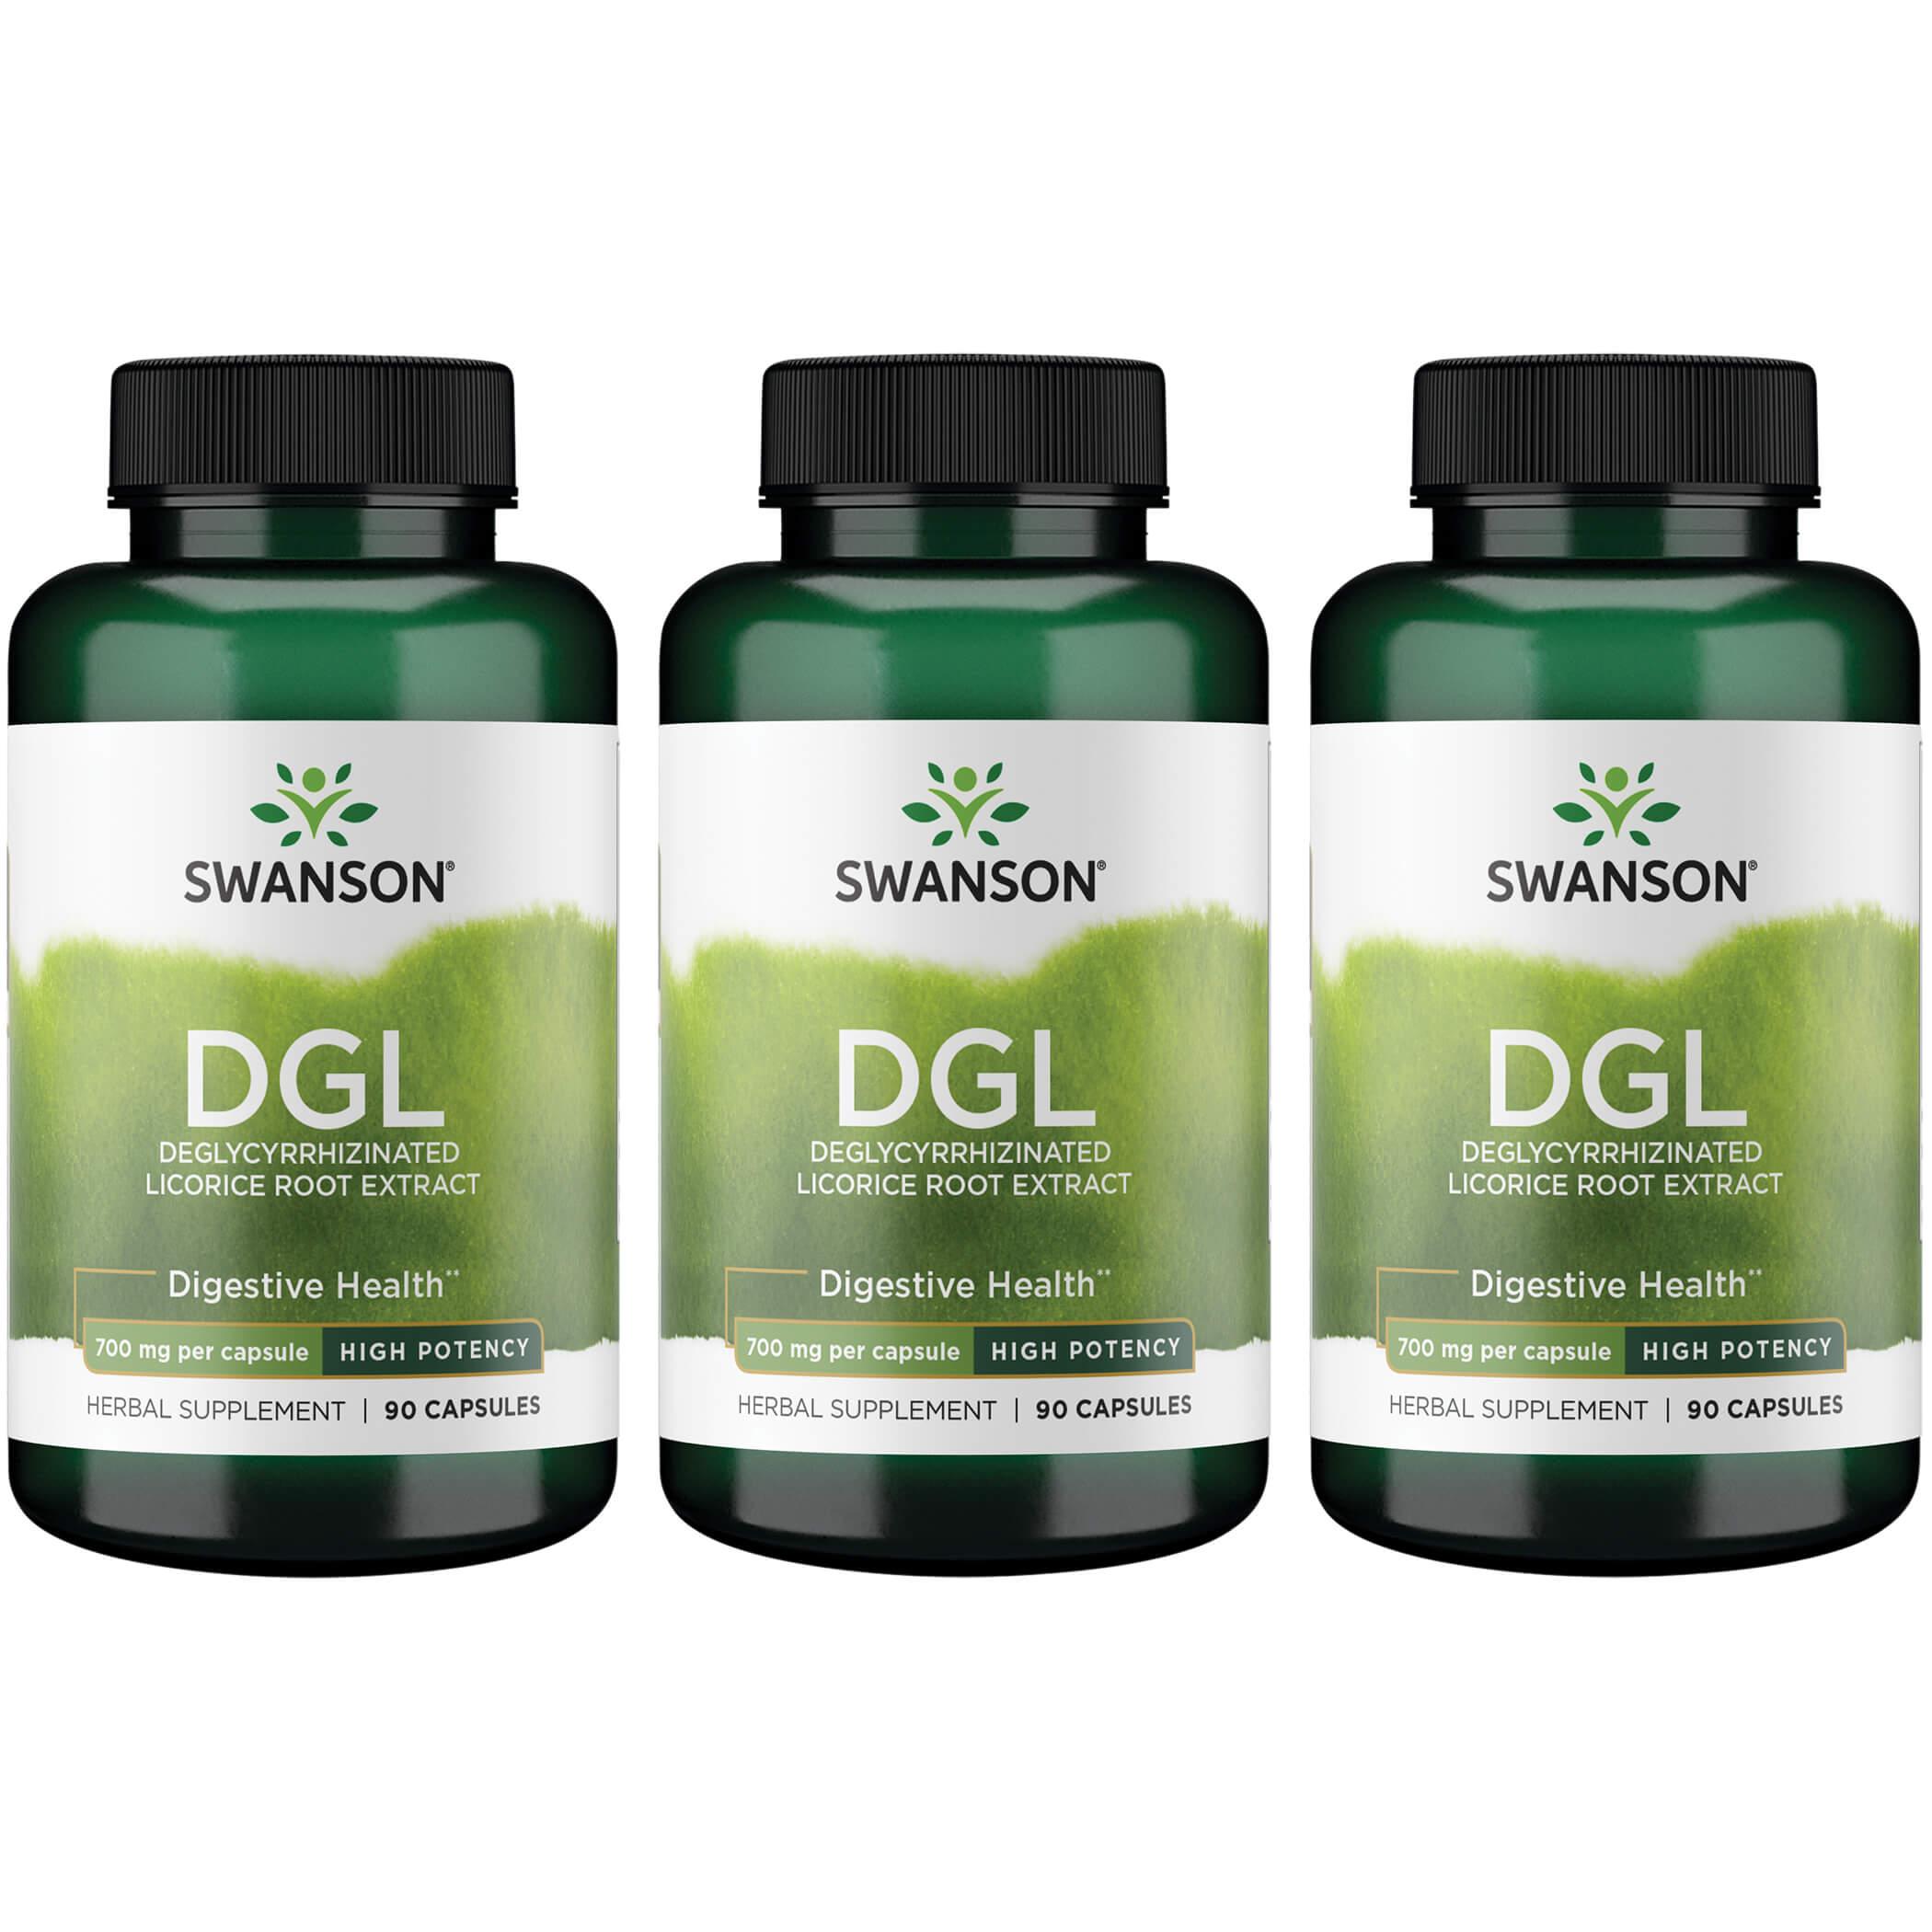 Swanson Superior Herbs Dgl Deglycyrrhizinated Licorice Root Extract - High Potency 3 Pack Vitamin 700 mg 90 Caps